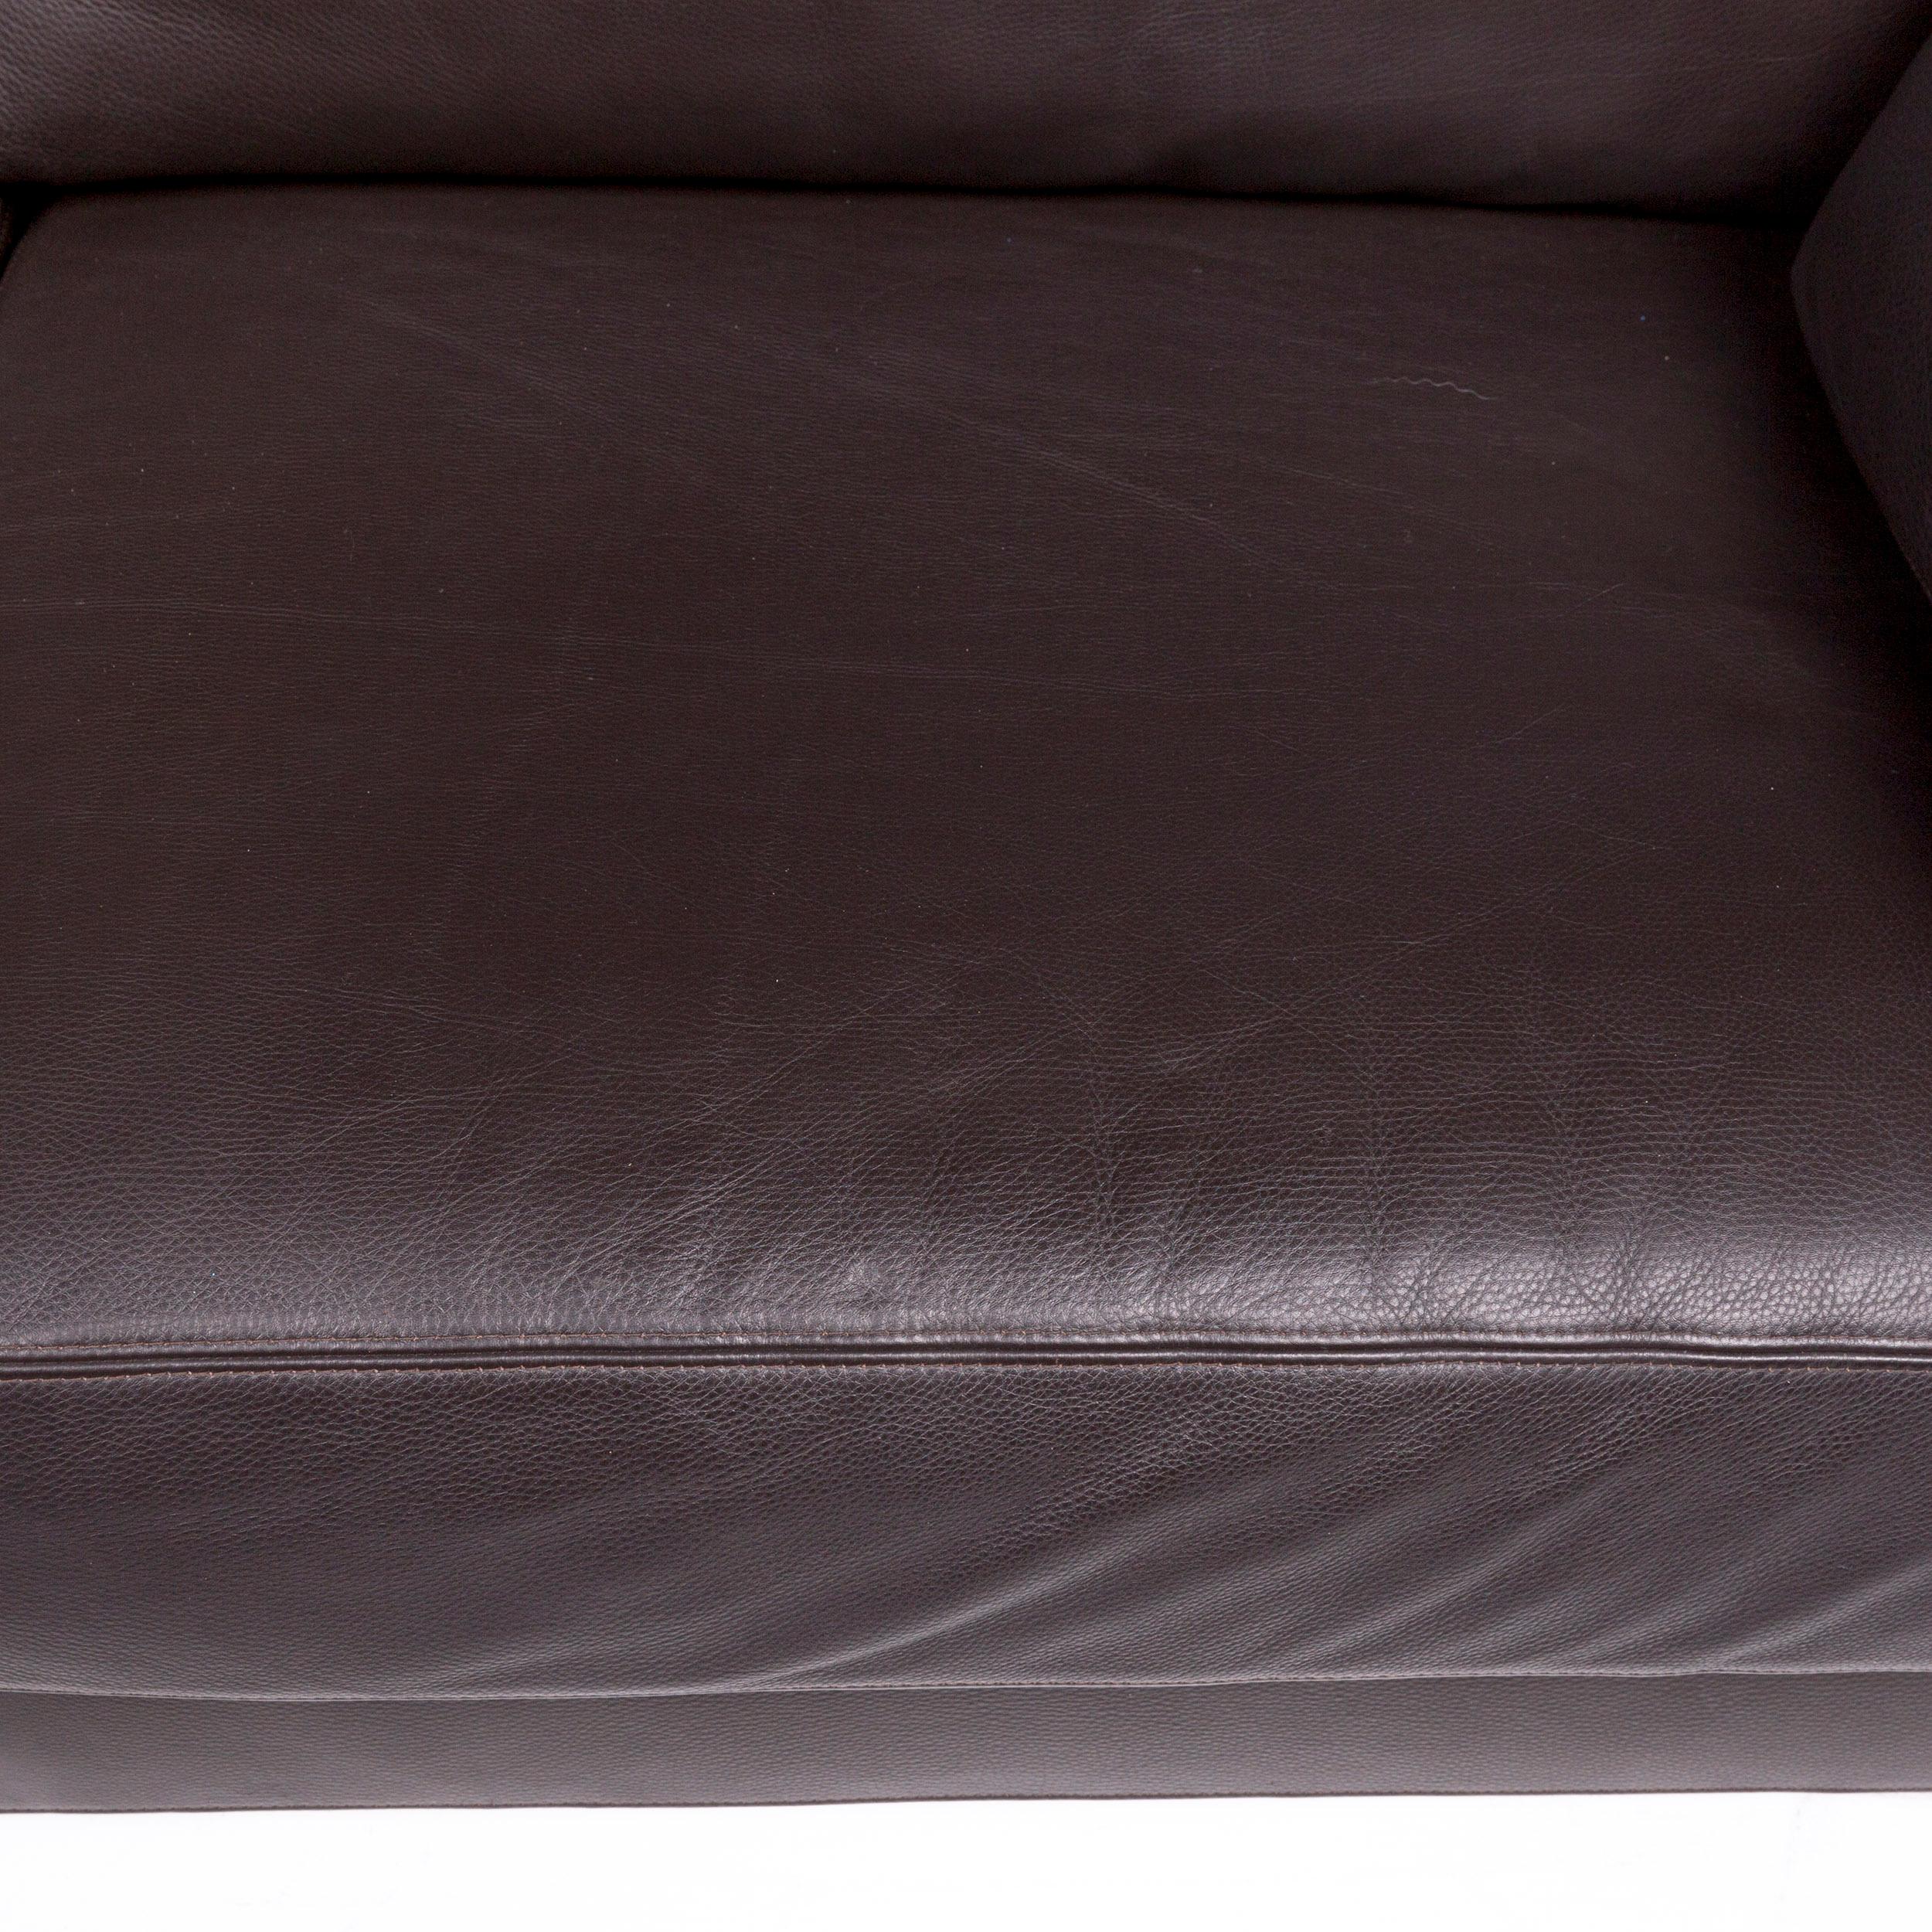 dark brown leather couch